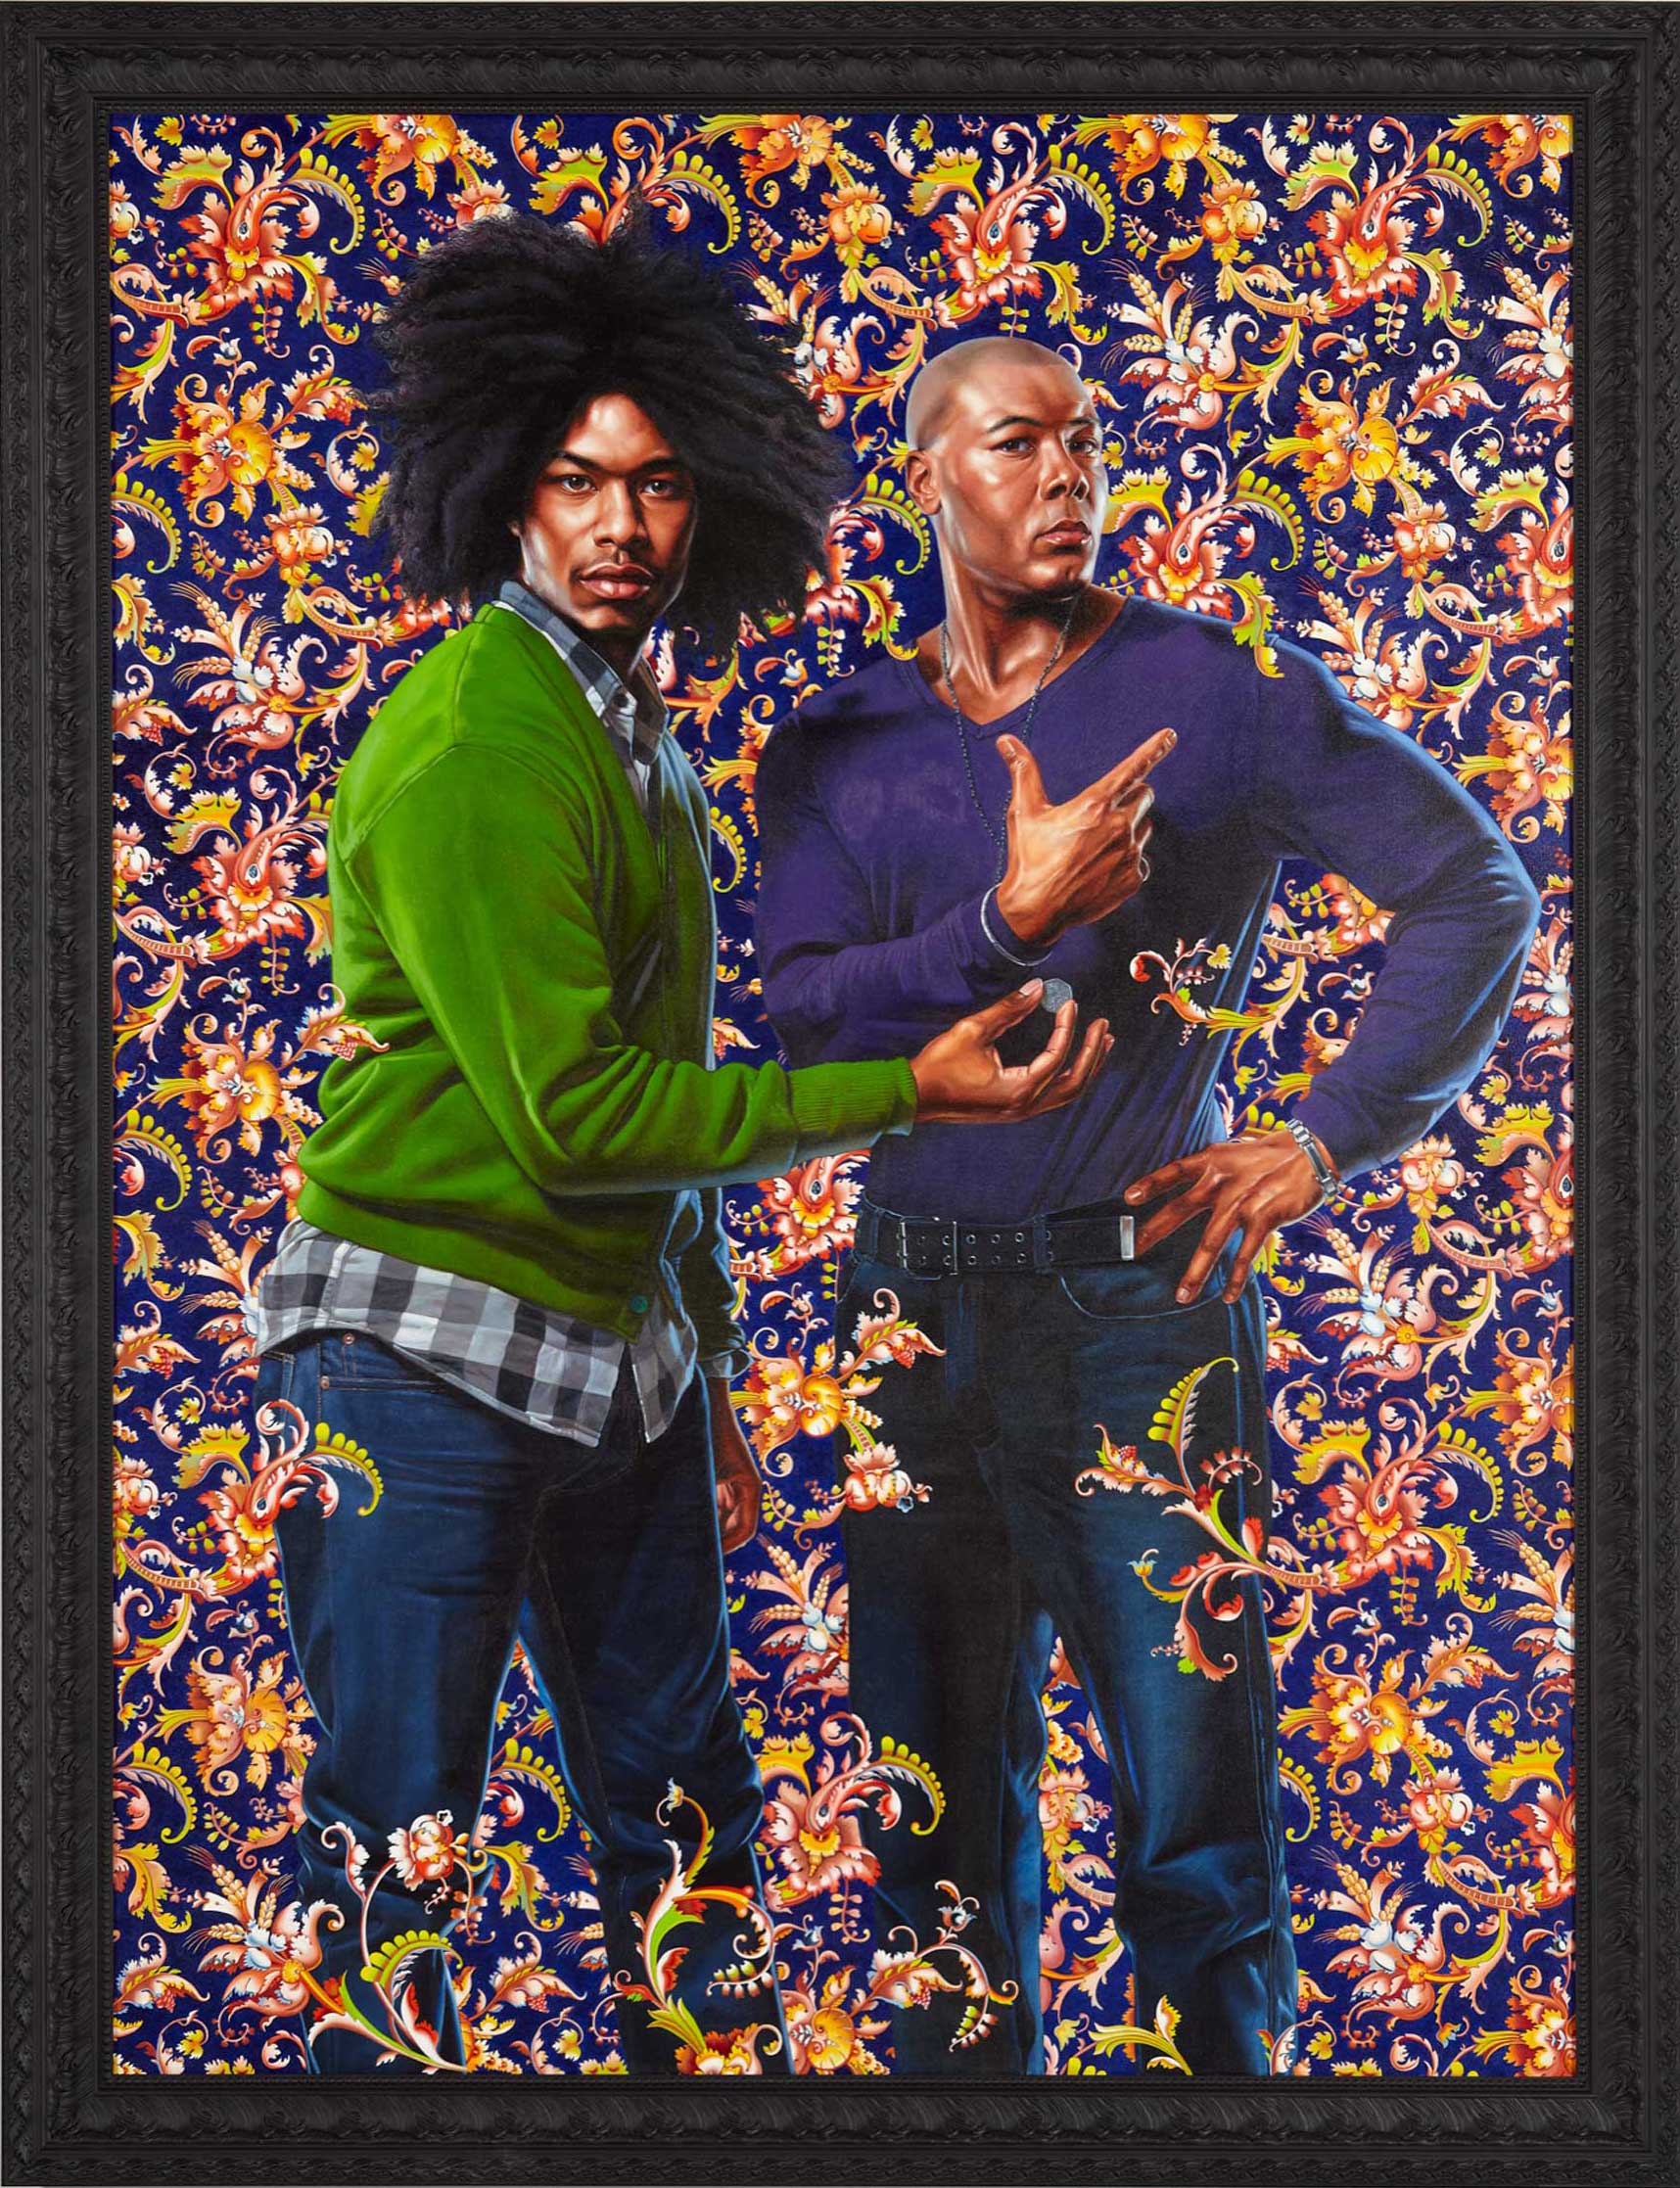 Kehinde Wiley | Selected Works: 2012 | The Tribute Money II, 2012, Oil on Canvas. | 3